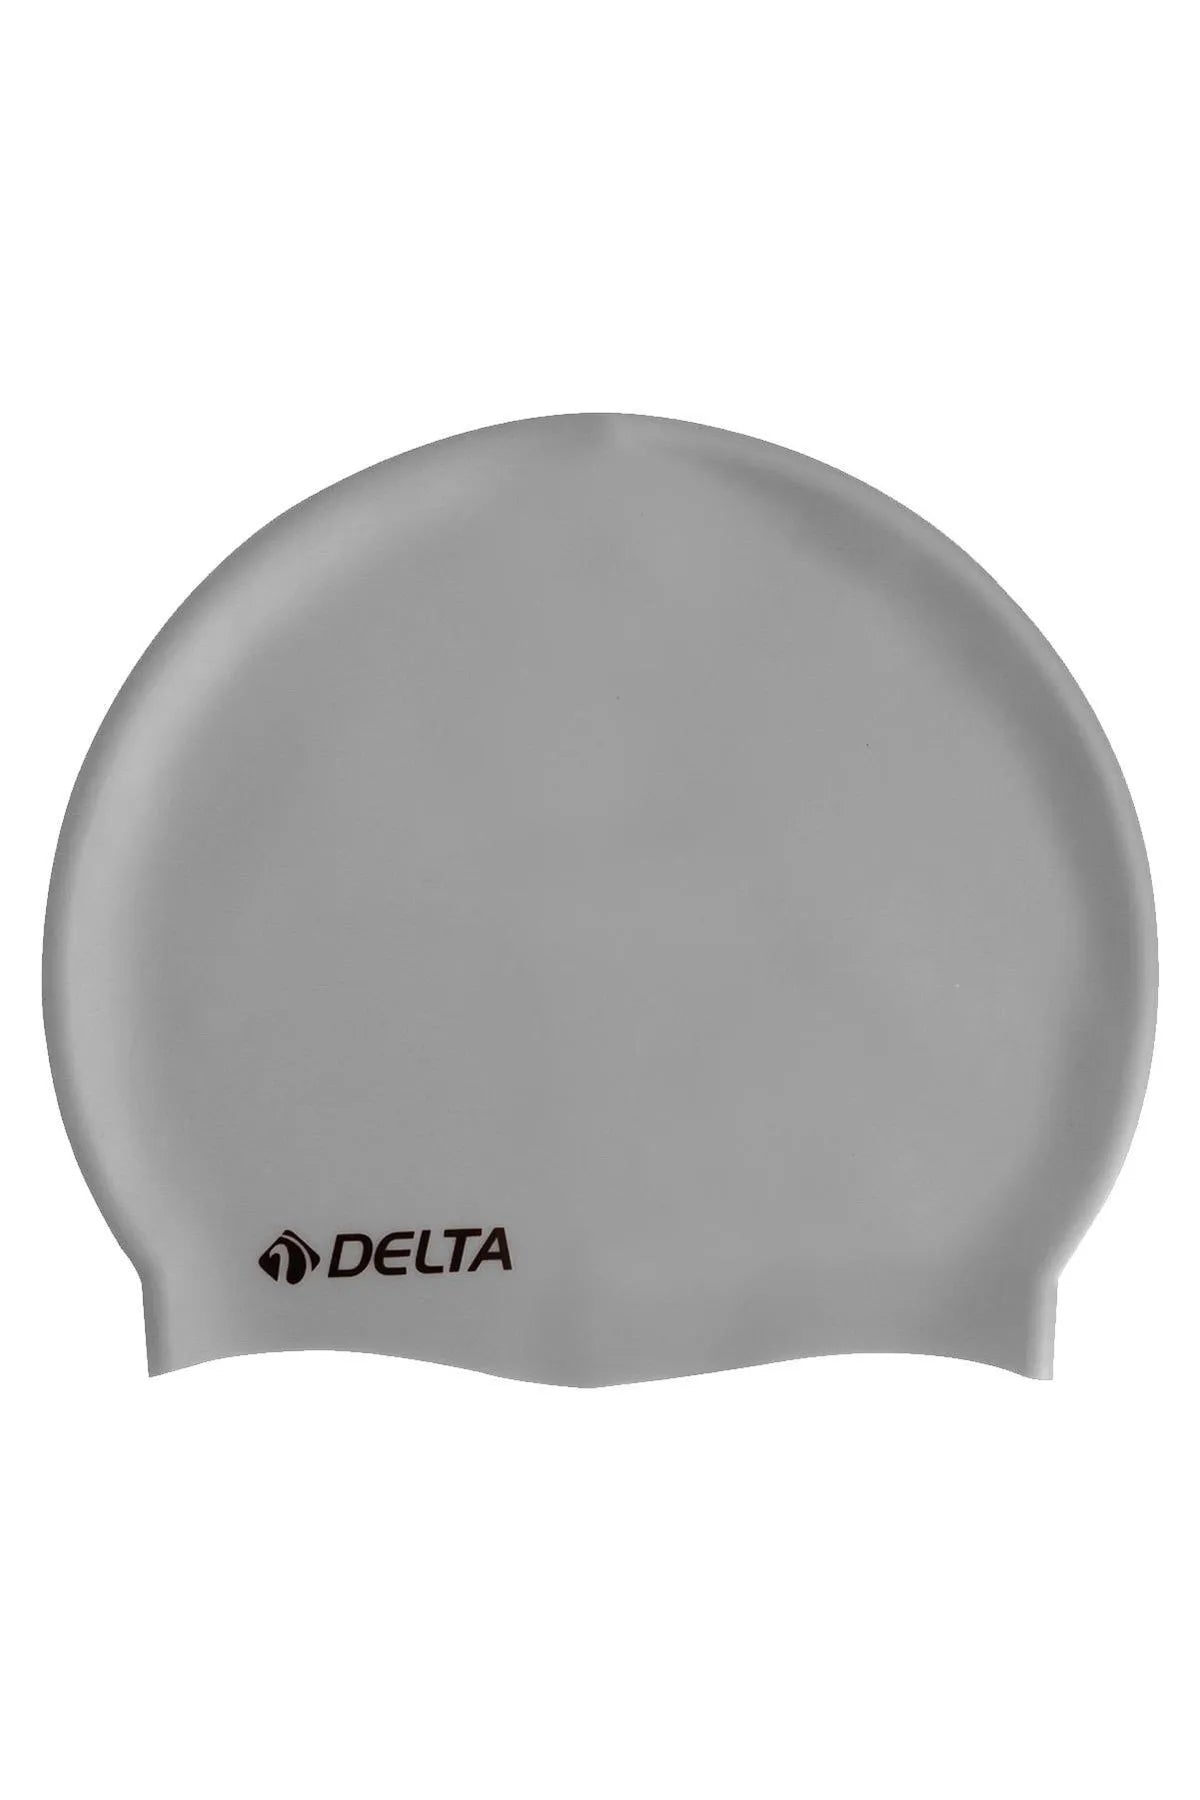 Silicone Bone Deluxe Swim Cap - Solid Gray for Pool and Sea | Ideal for Braids, Dreadlocks, and Long Hair | Includes Free Ear Plugs and PVC Storage Bag